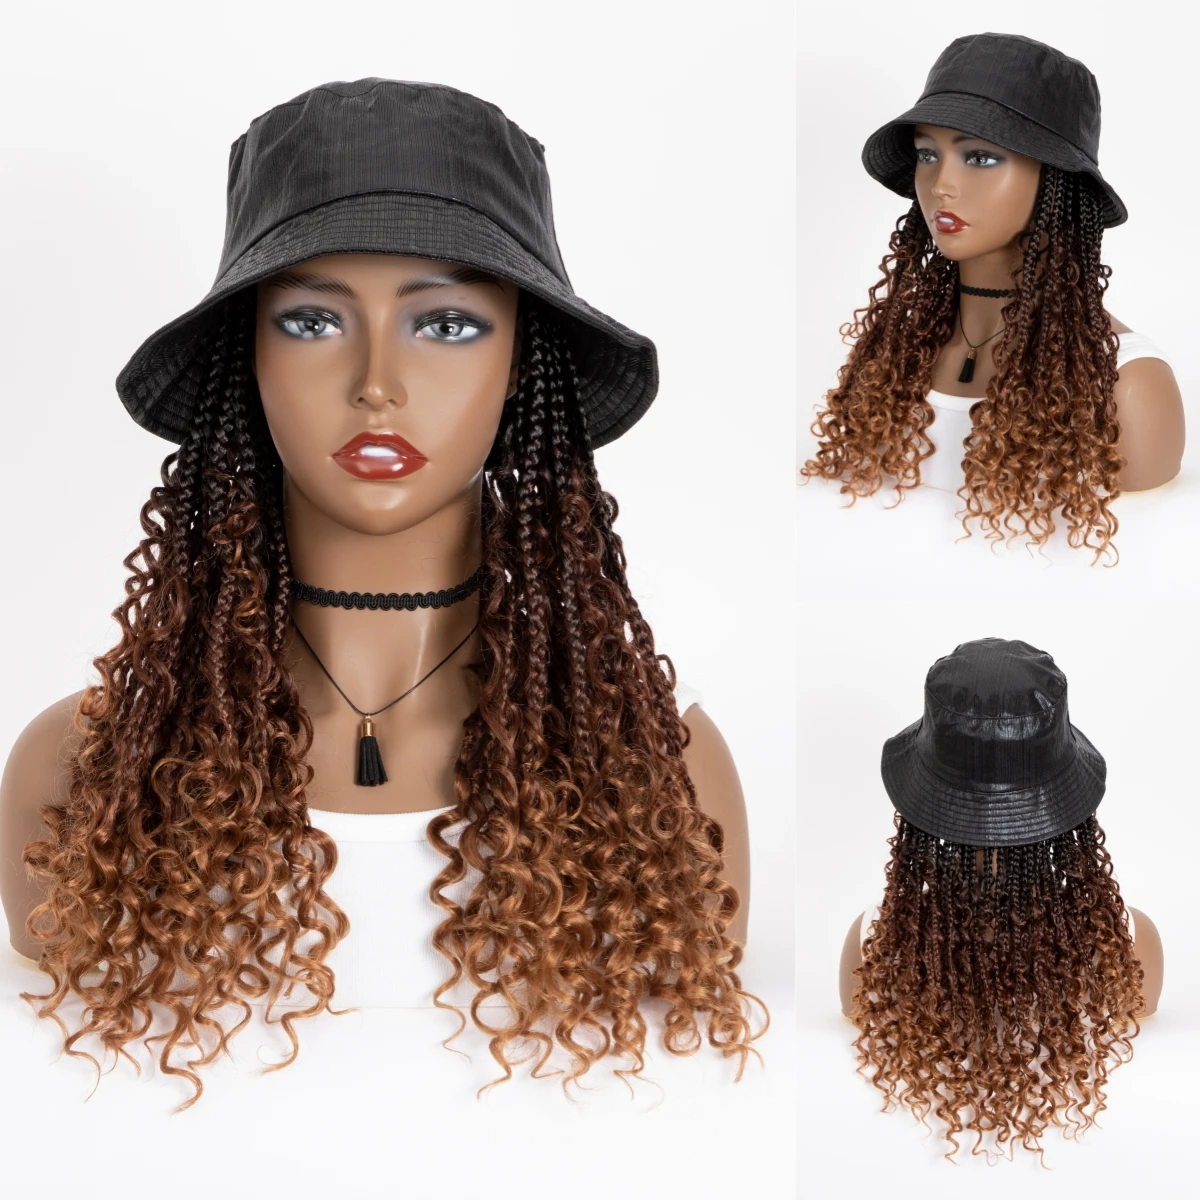 

WIGERA Synthetic Hat Wig Goddess Boho Box Braids With Curly Ends Ombre Black Blond Bohemian Braids Braiding Hair With Bucket Hat